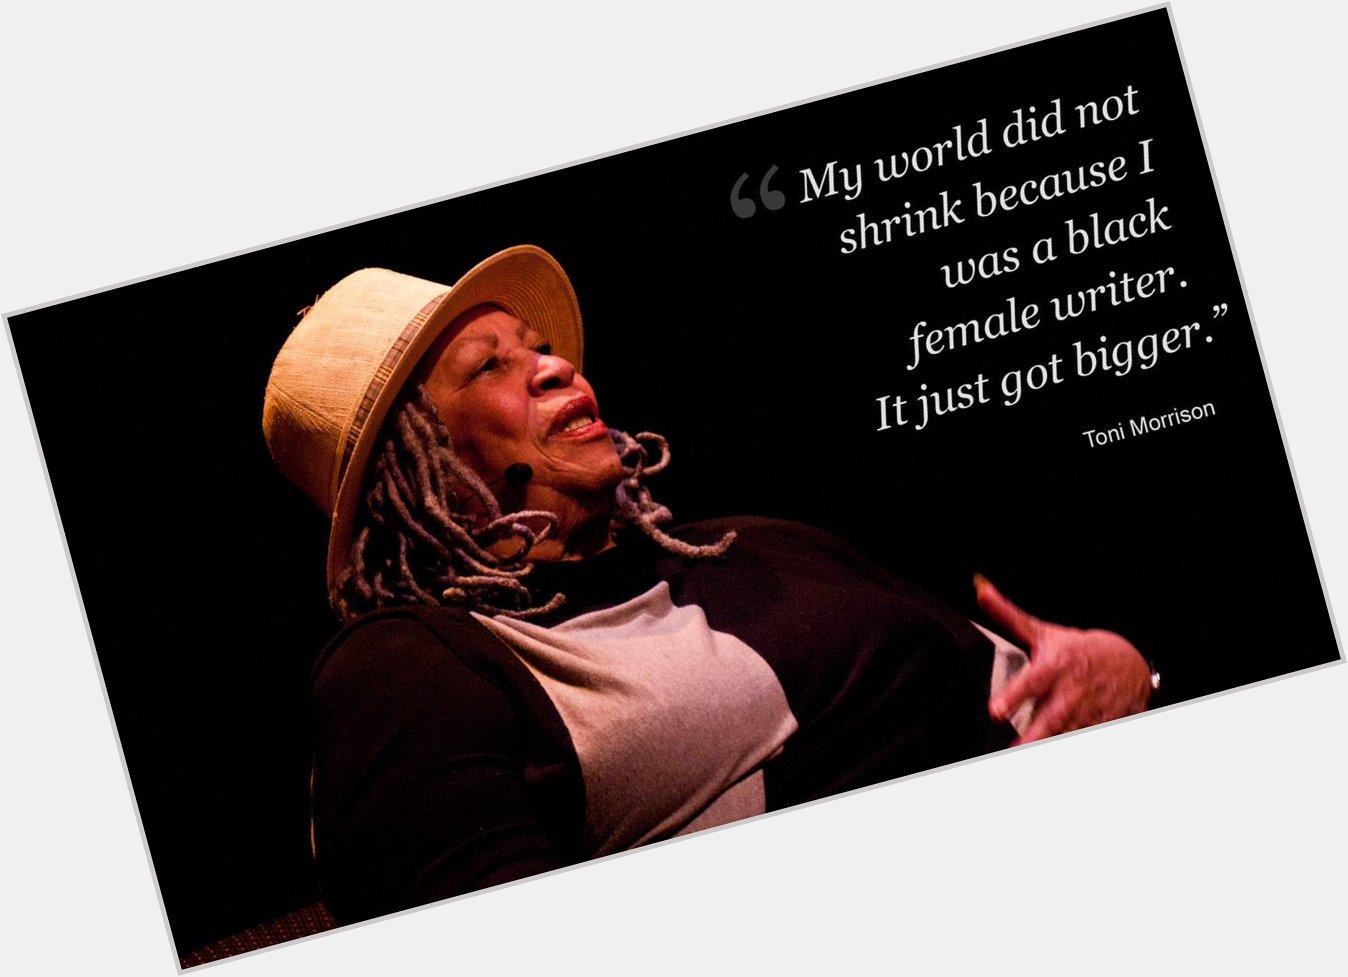  My world did not shrink because I was a black female writer Happy birthday Toni Morrison.  